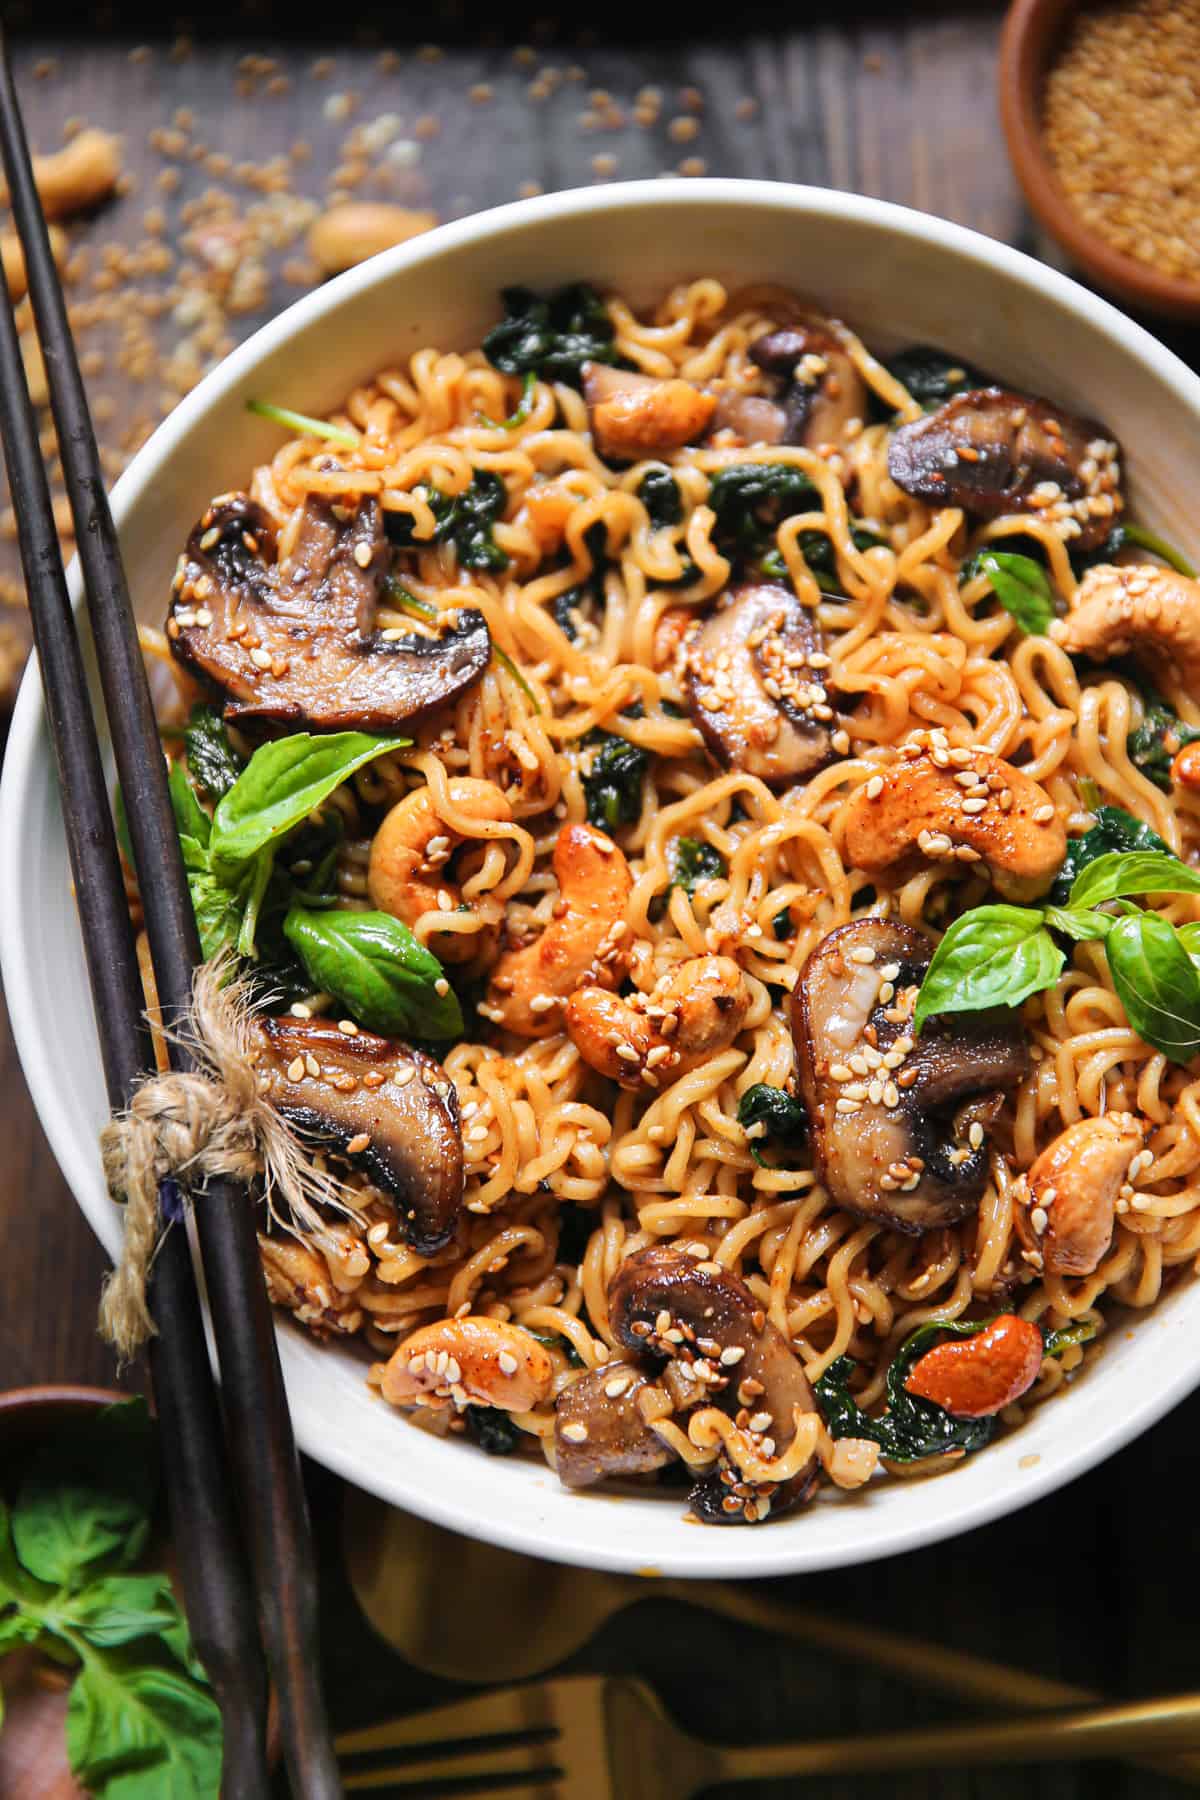 vegetarian ramen noodles with mushrooms, spinach, and cashews in a bowl